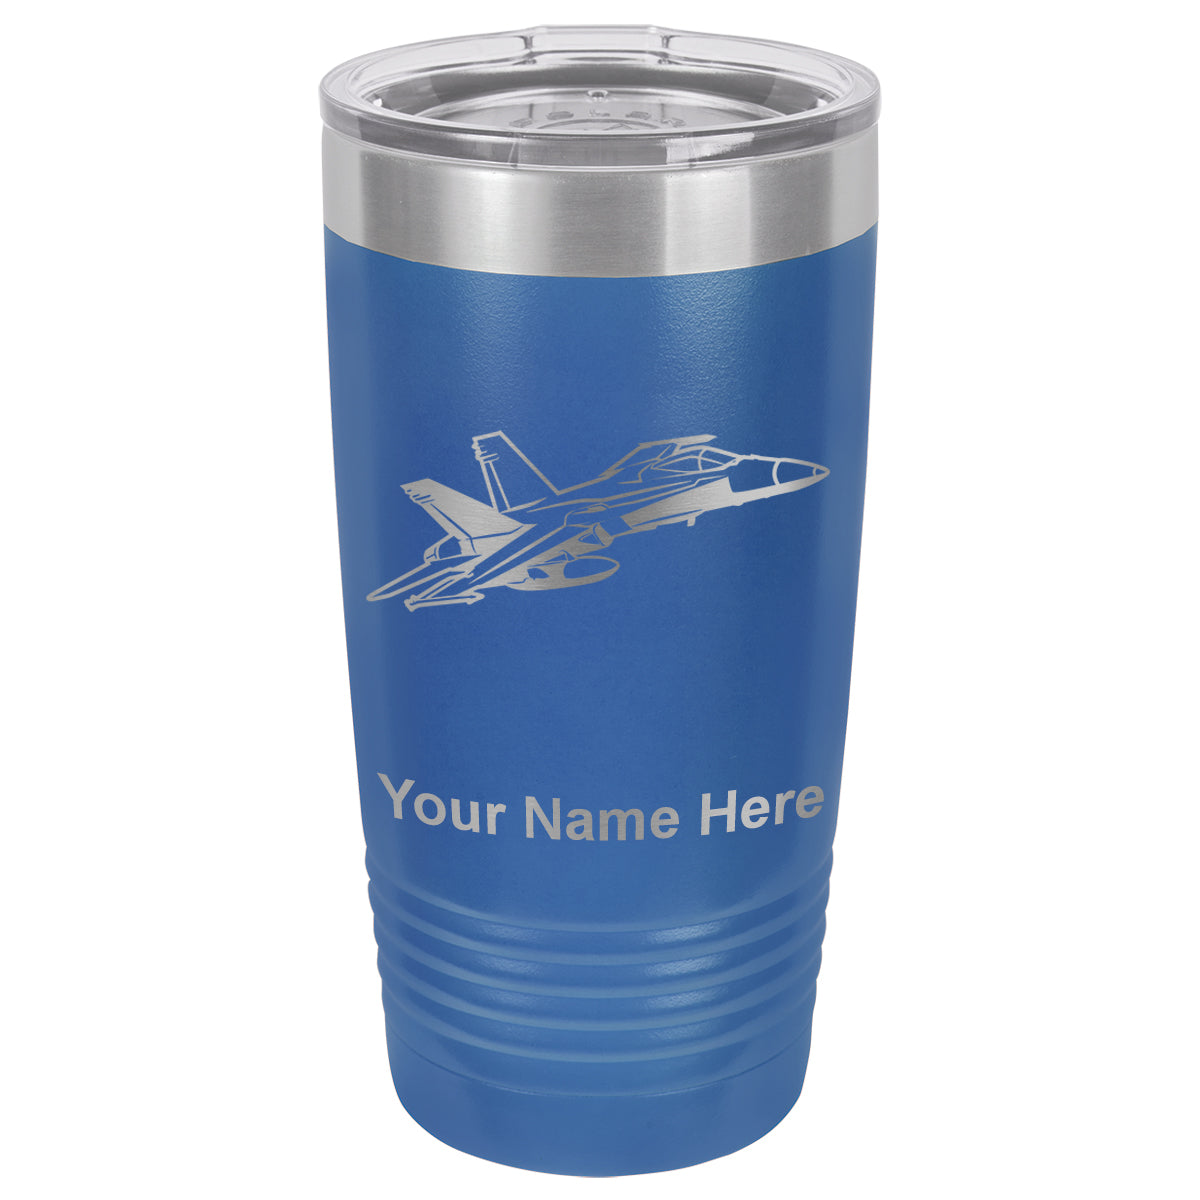 20oz Vacuum Insulated Tumbler Mug, Fighter Jet 2, Personalized Engraving Included